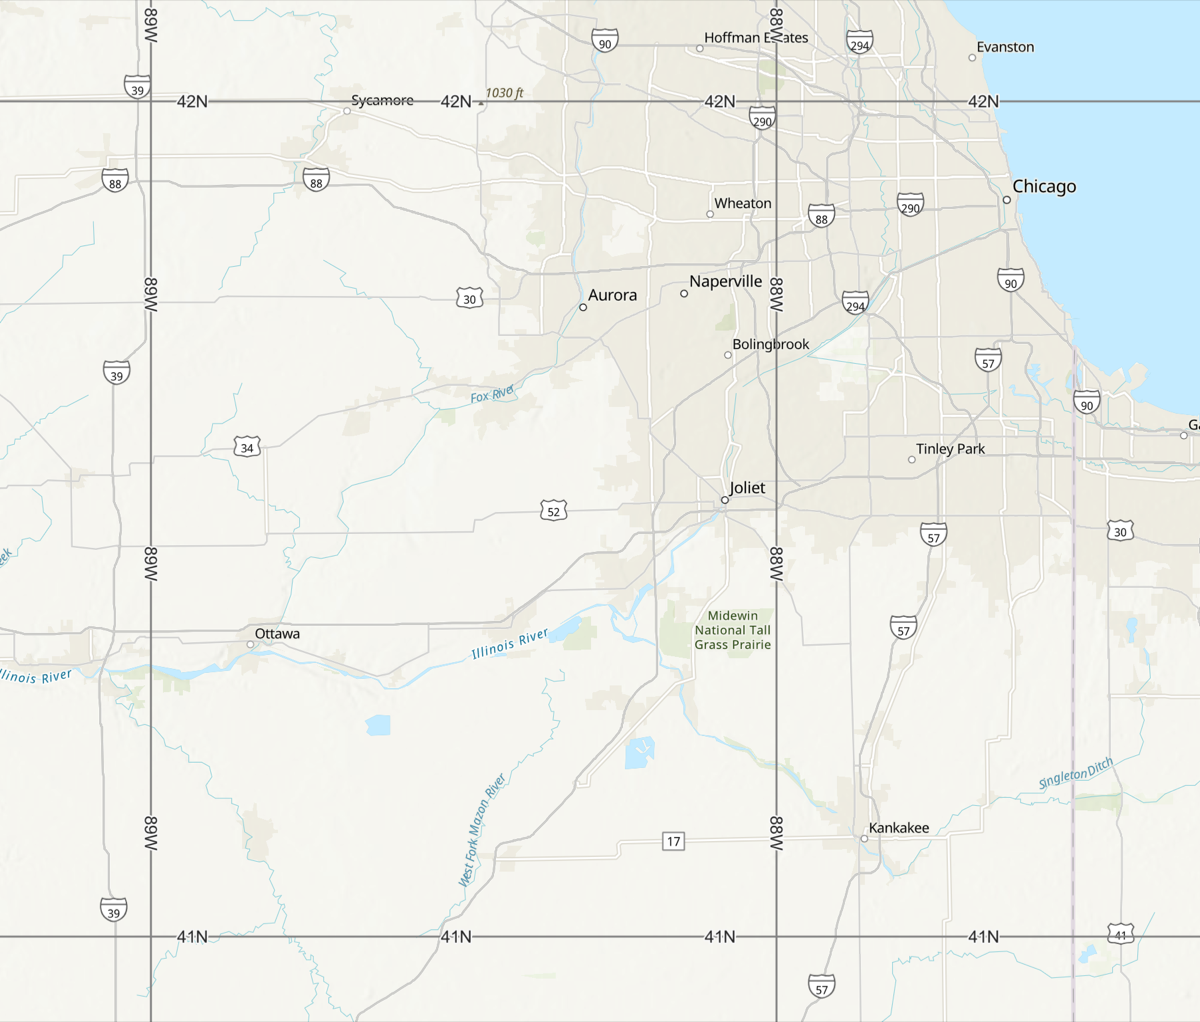 Map of northeast Illinois with one degree lines of latitude and longitude